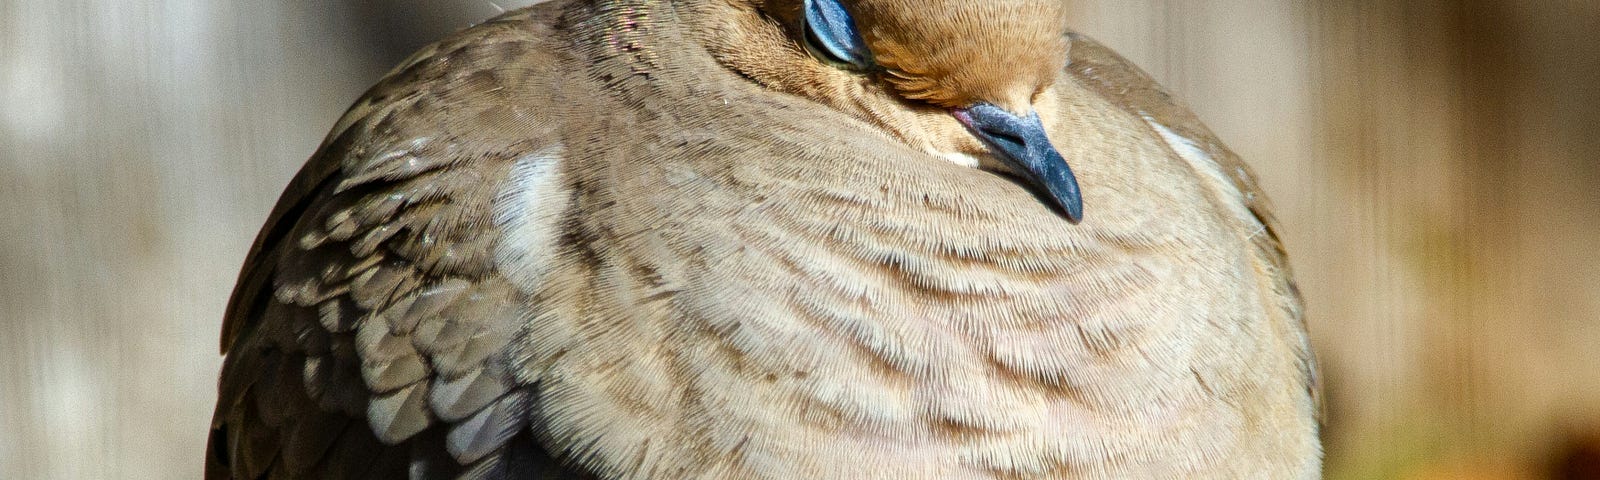 A fluffy, soft, round, sleeping mourning dove.